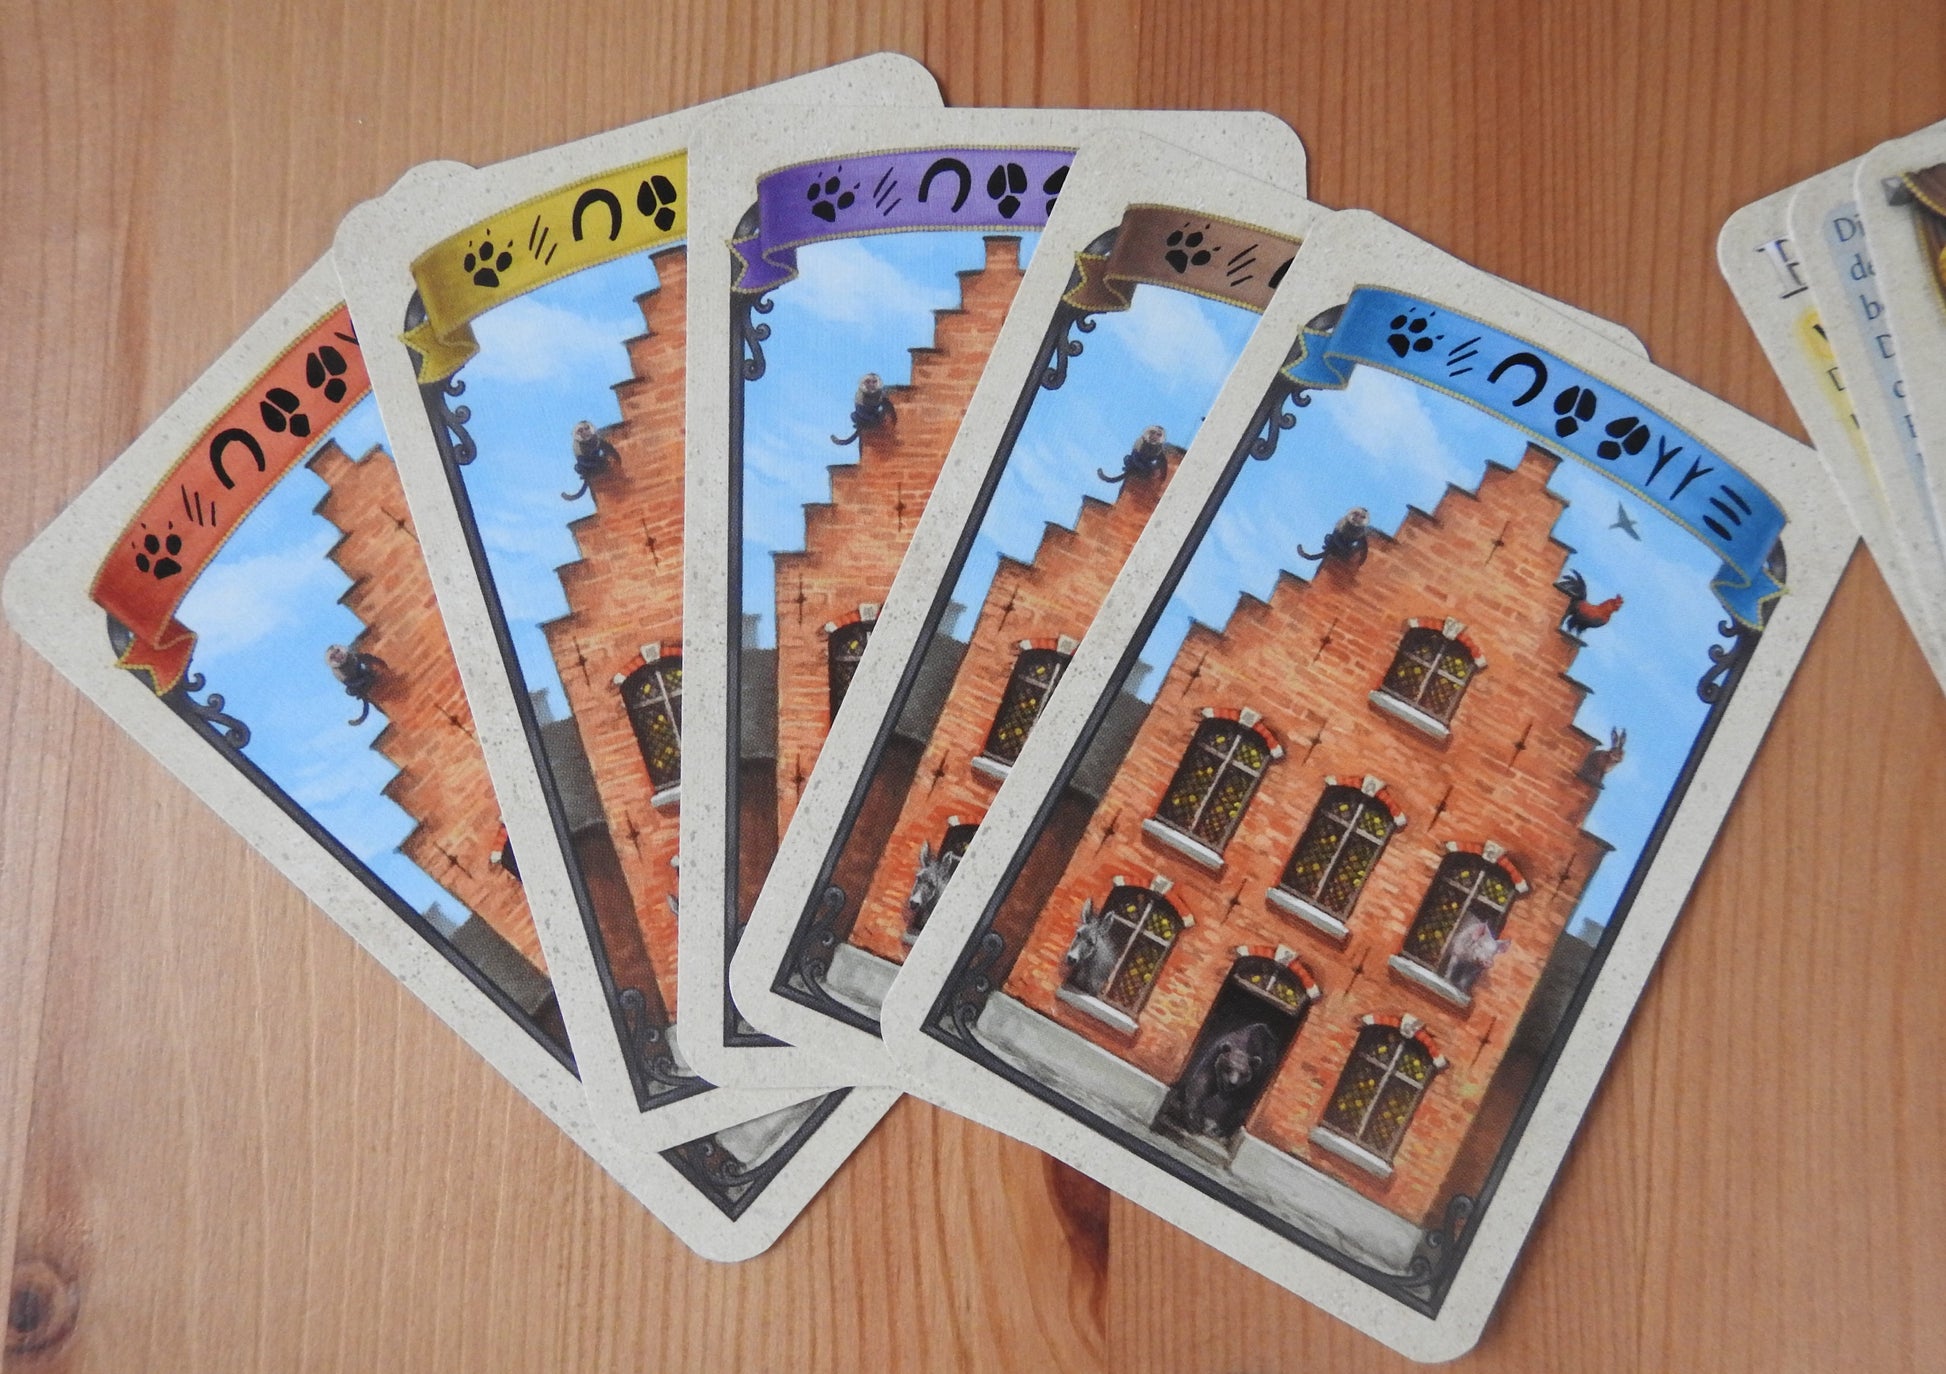 View of the backs of the cards in the five different colours - red, yellow, purple, brown and blue.